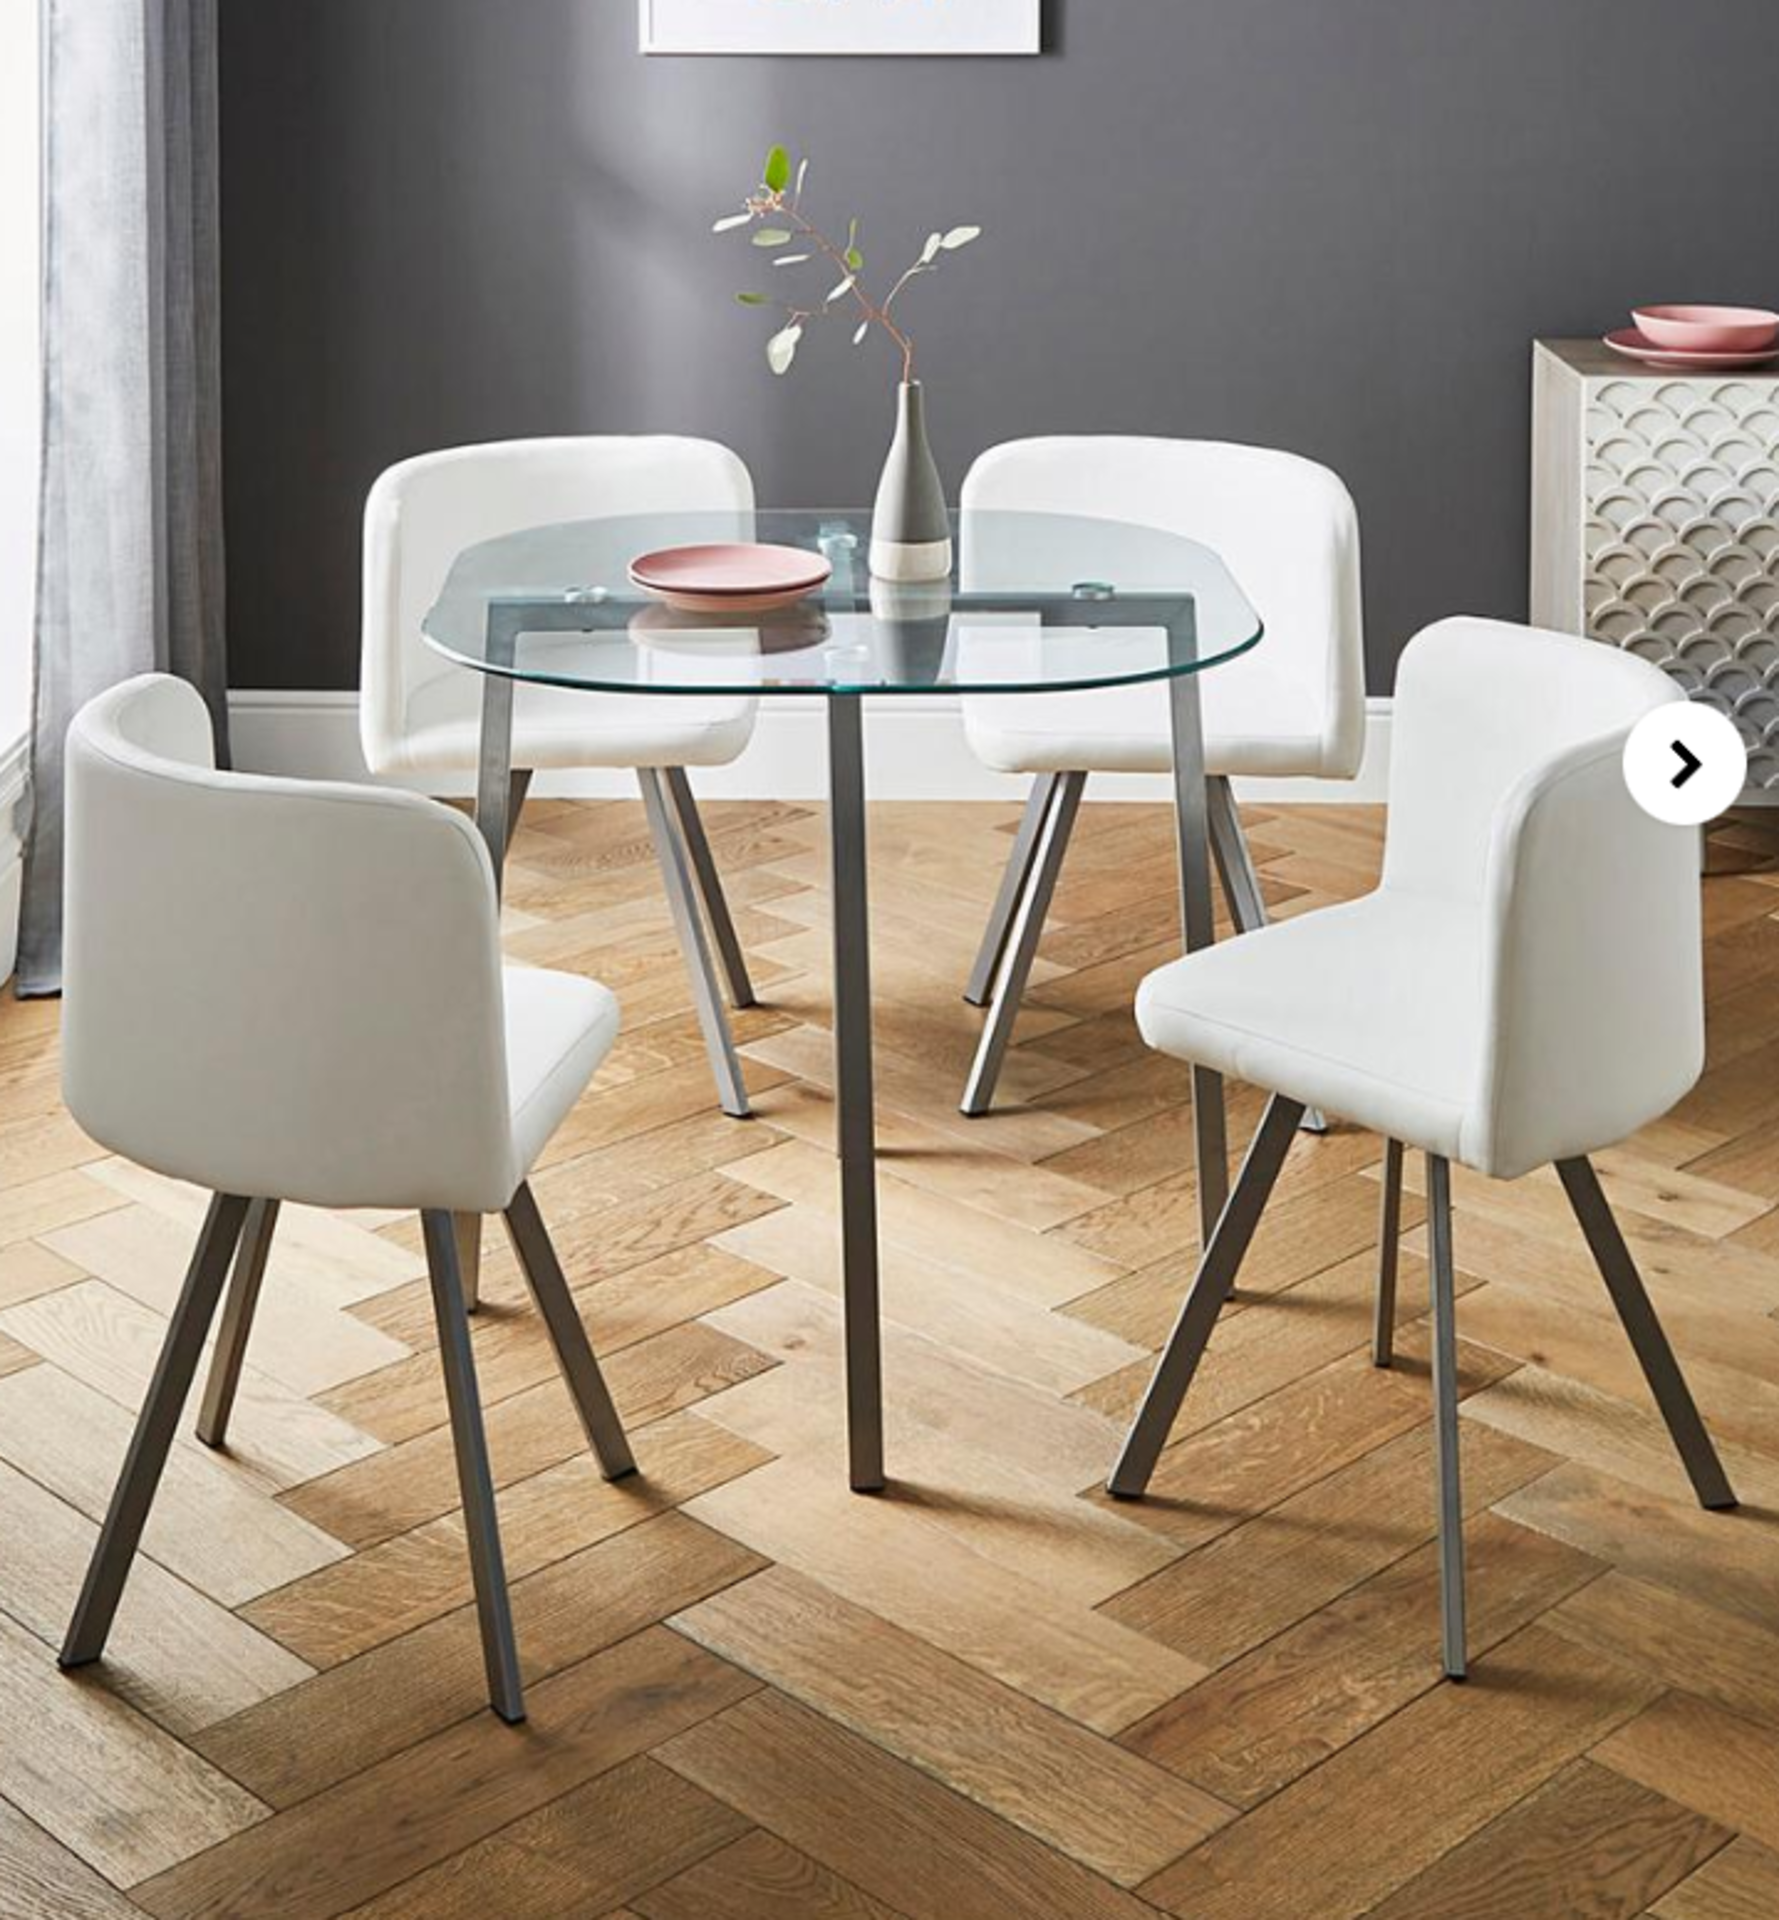 Reese Hideaway Spacesaving Dining Set. - ER28. Perfectly designed for modern homes where space-